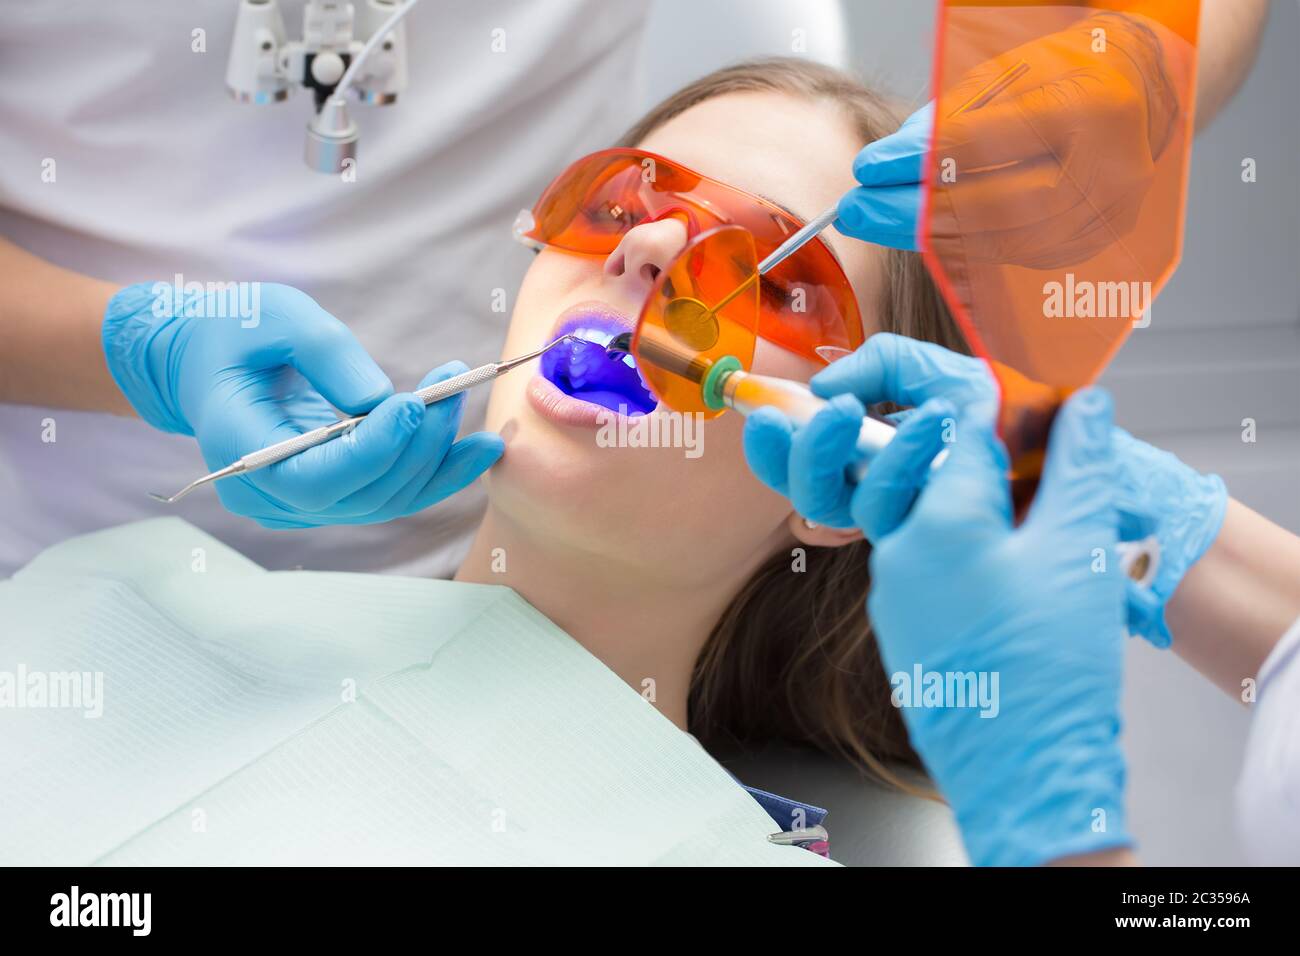 Tooth filling ultraviolet lamp Stock Photo